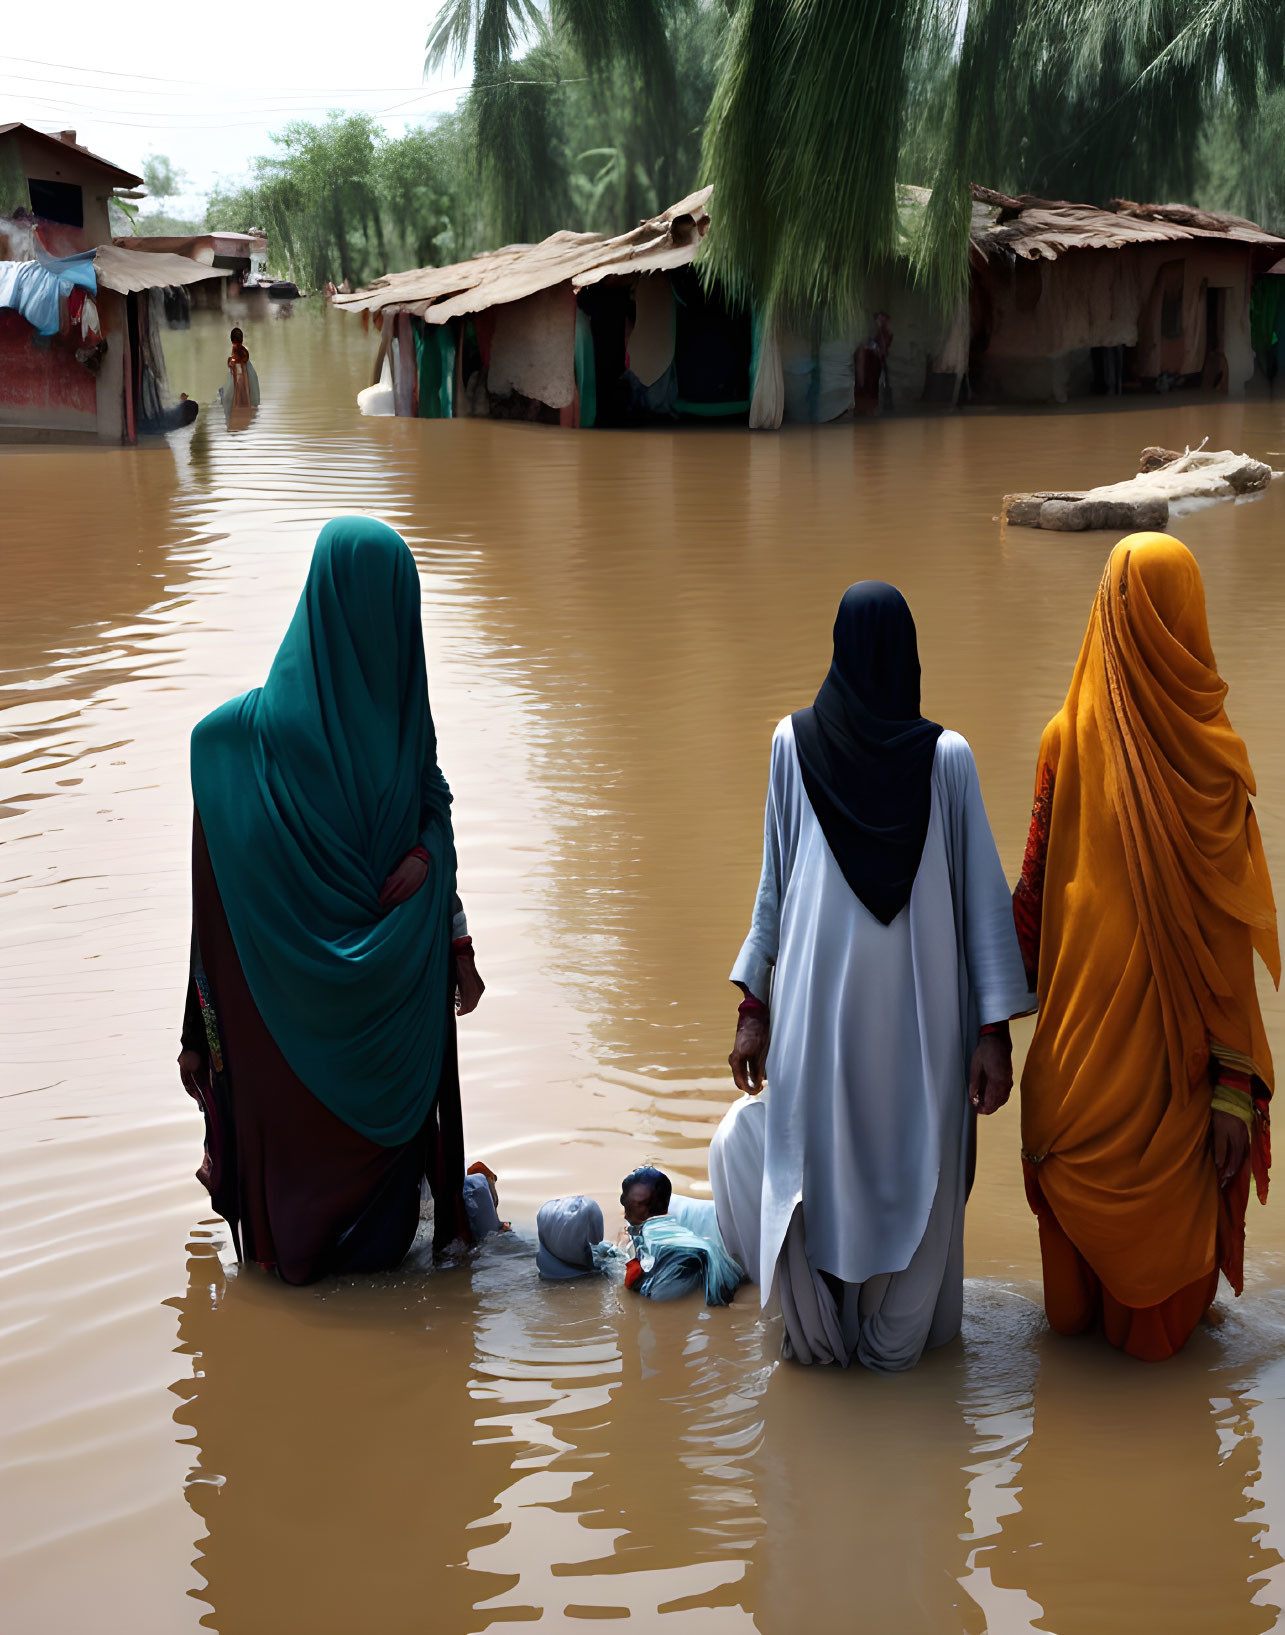 Three people in traditional attire standing in floodwaters with submerged houses.